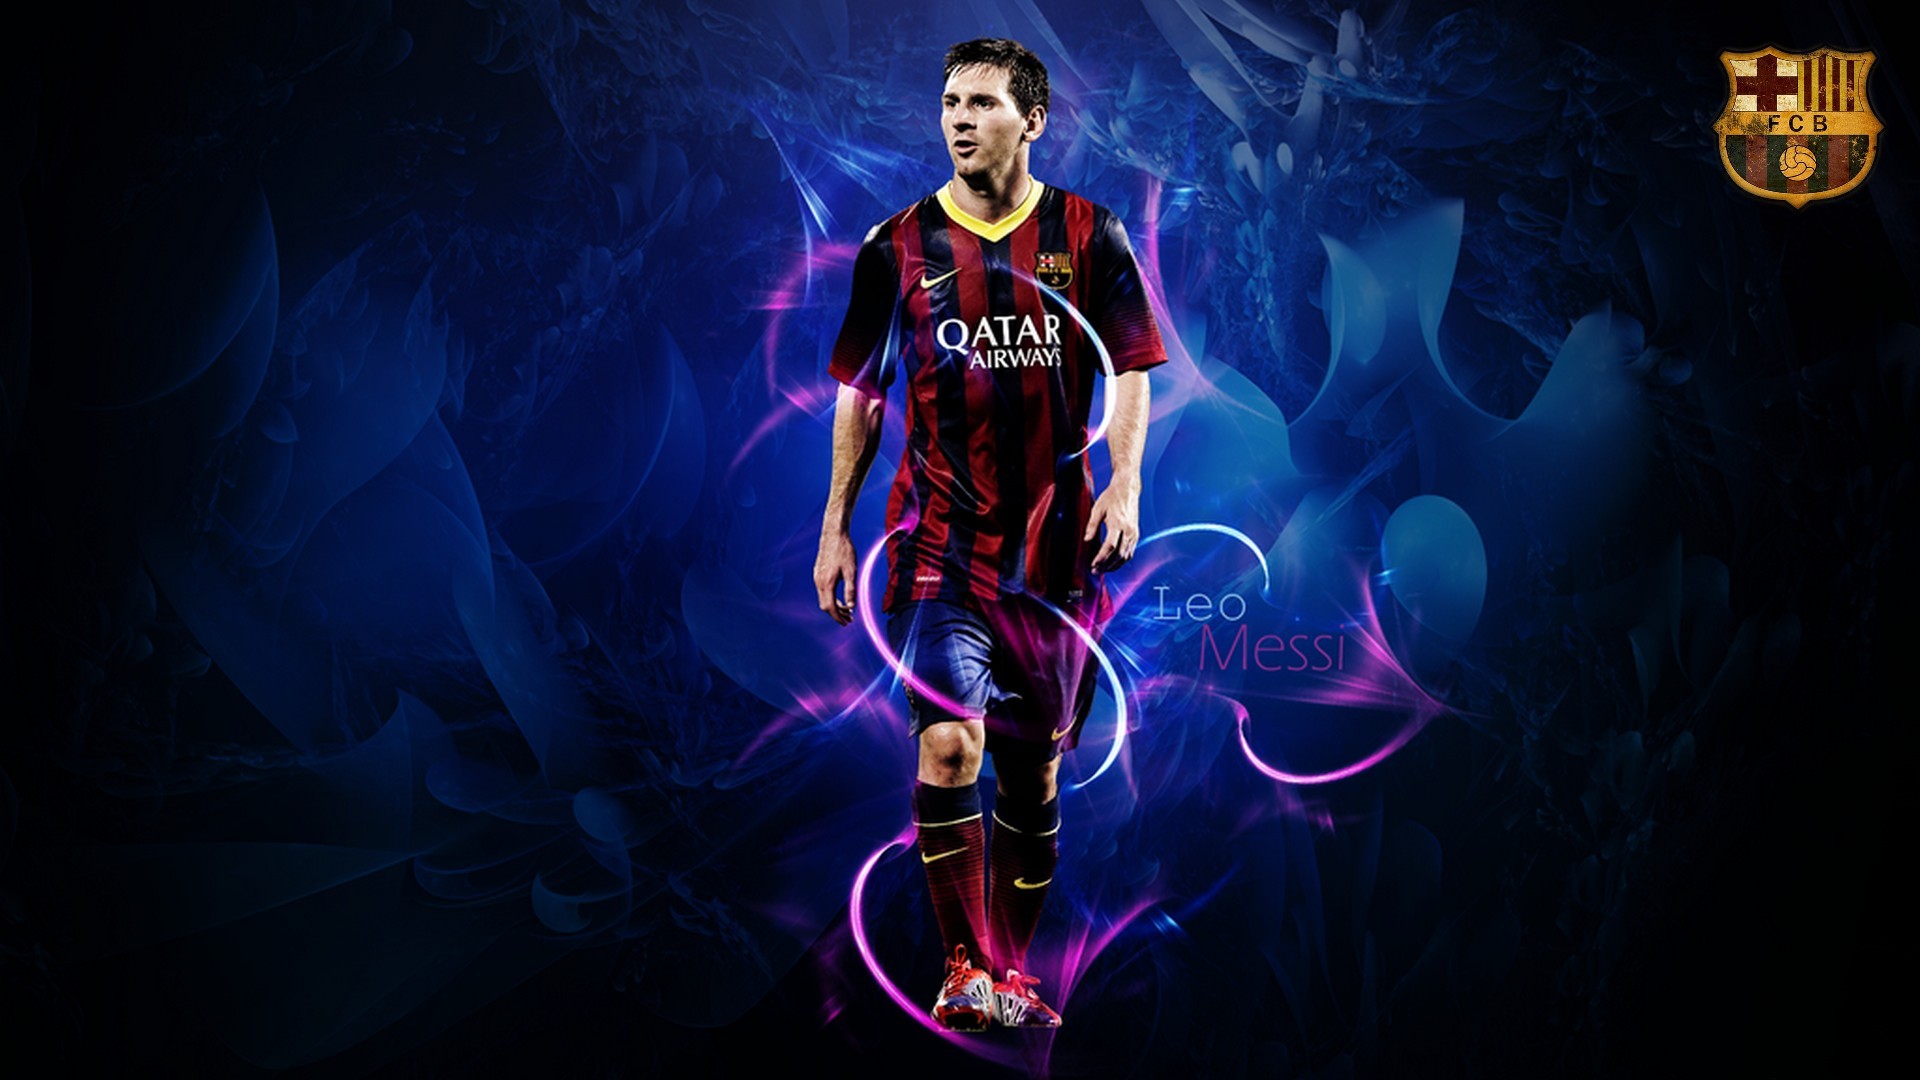 Wallpapers Leo Messi With Resolution 1920X1080 pixel. You can make this wallpaper for your Mac or Windows Desktop Background, iPhone, Android or Tablet and another Smartphone device for free